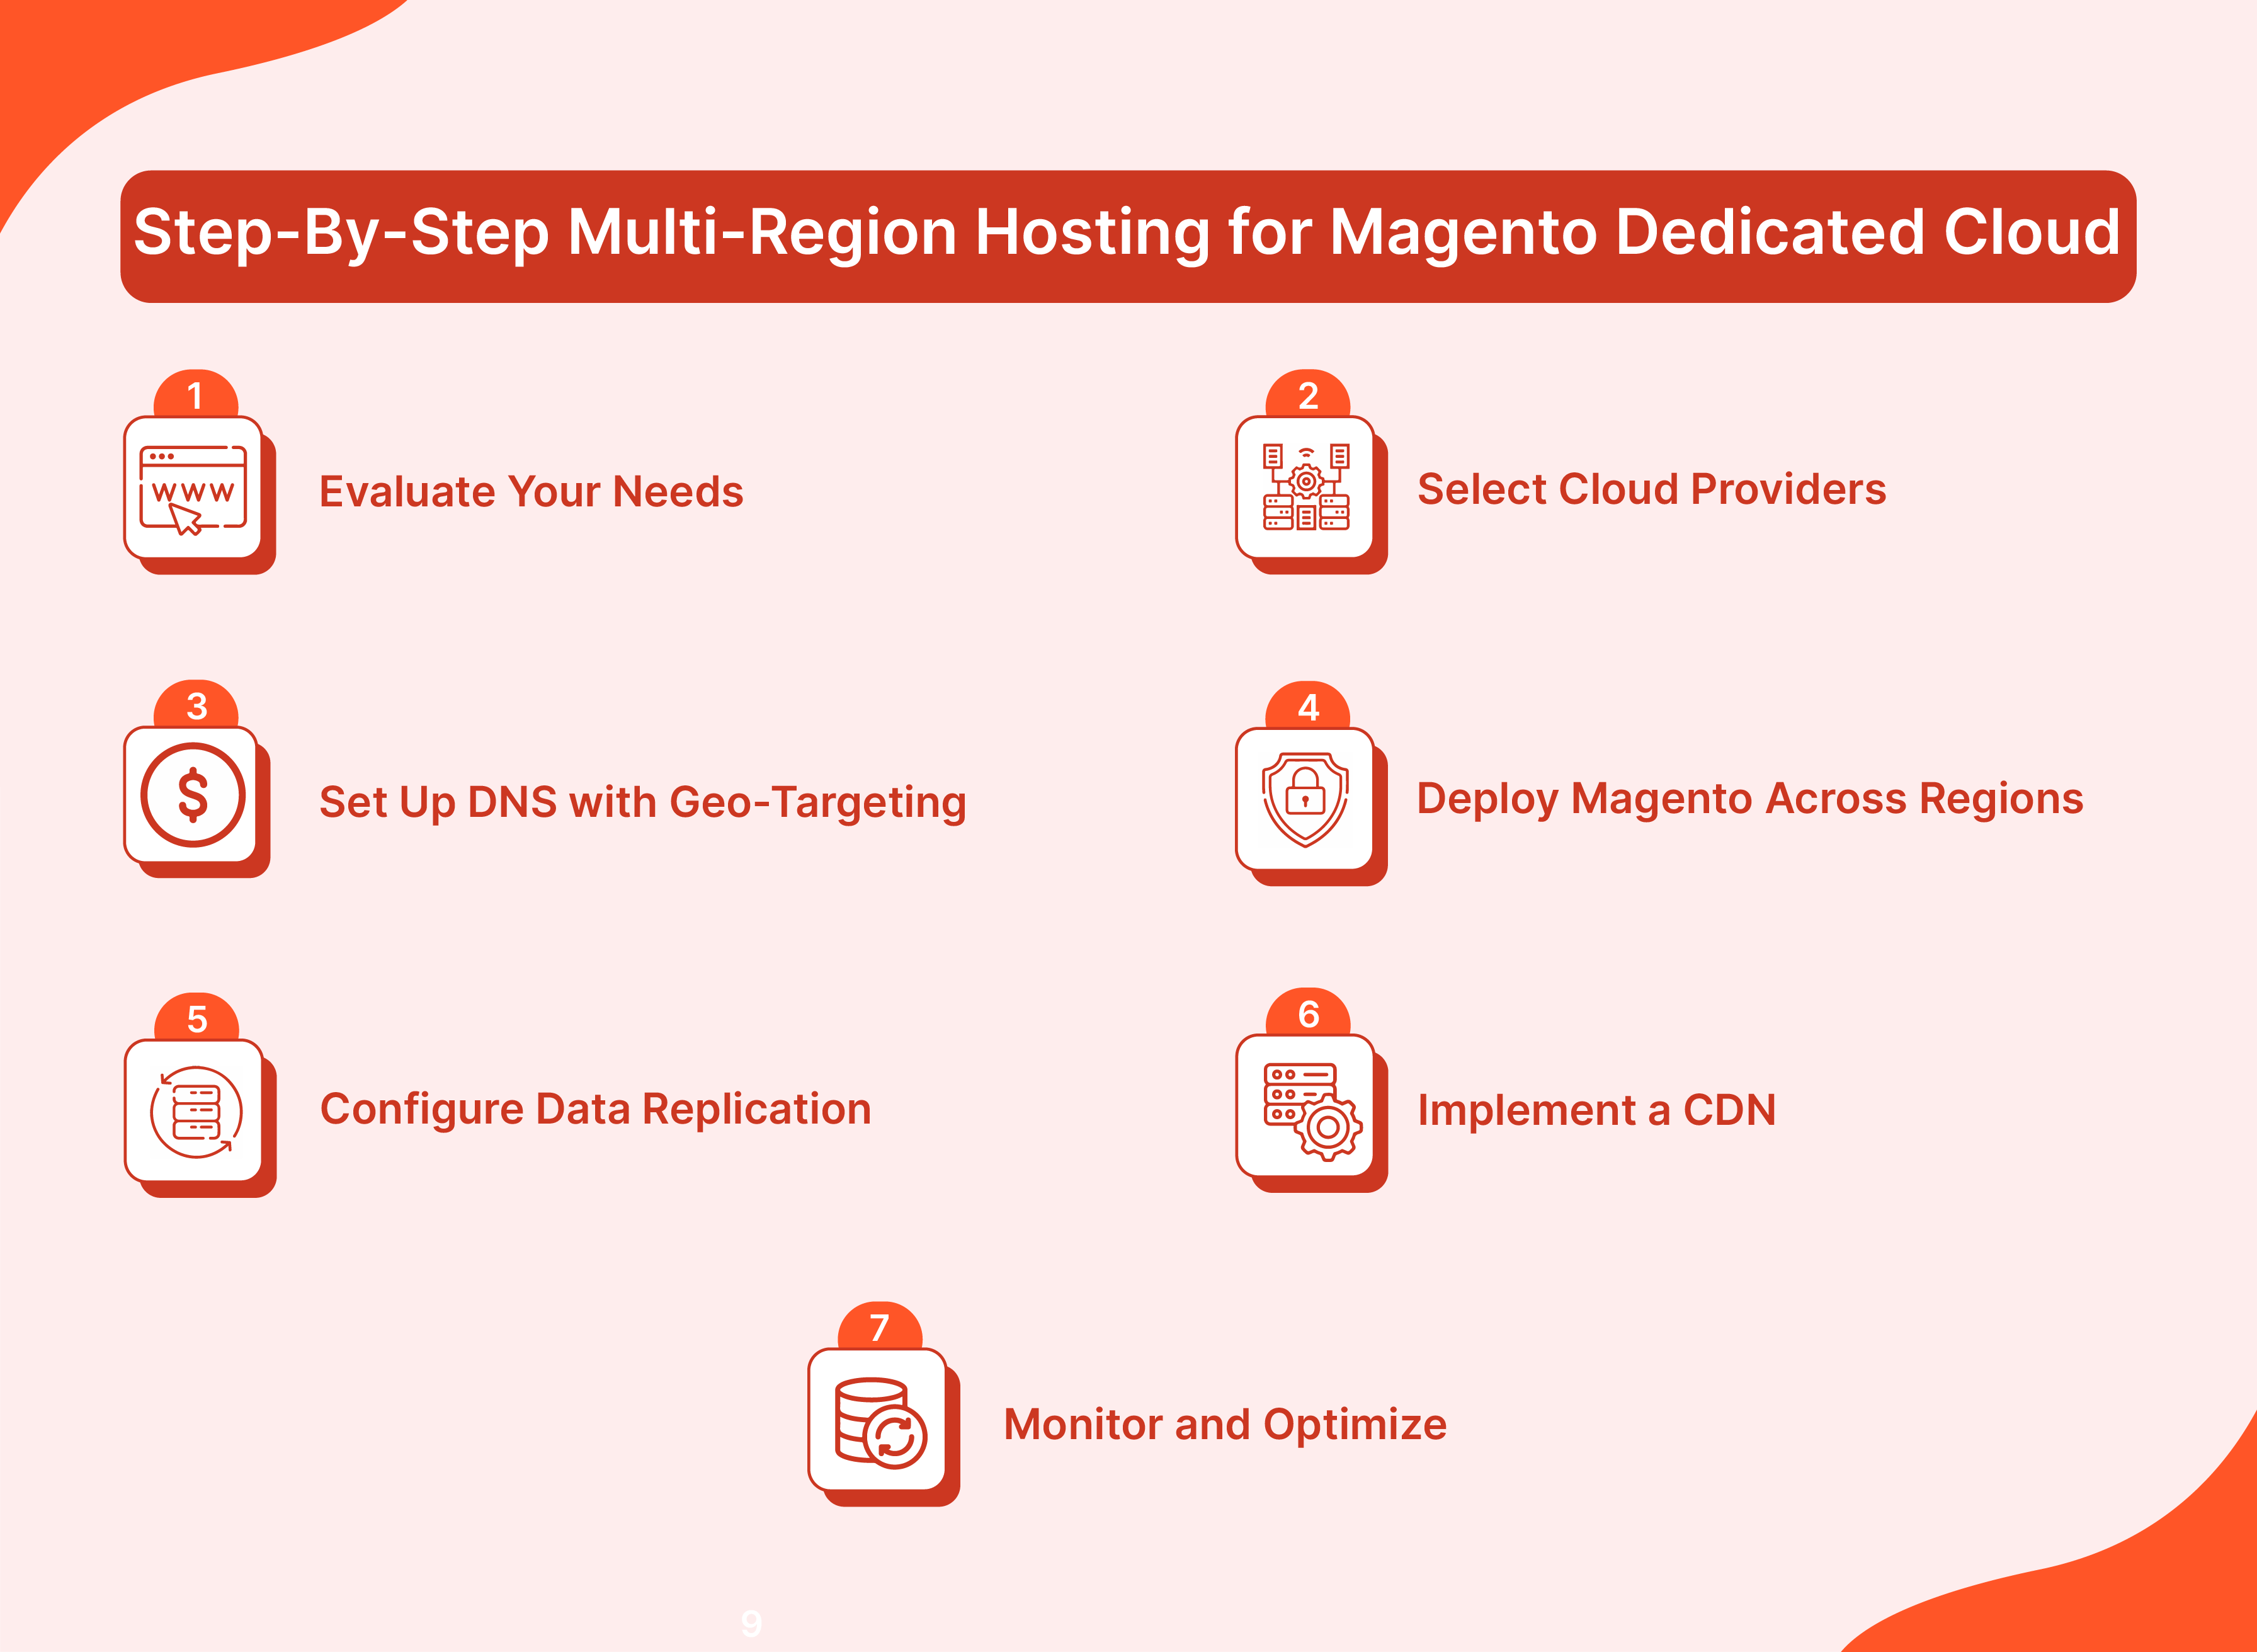 Step-By-Step Multi-Region Hosting for Magento Dedicated Cloud